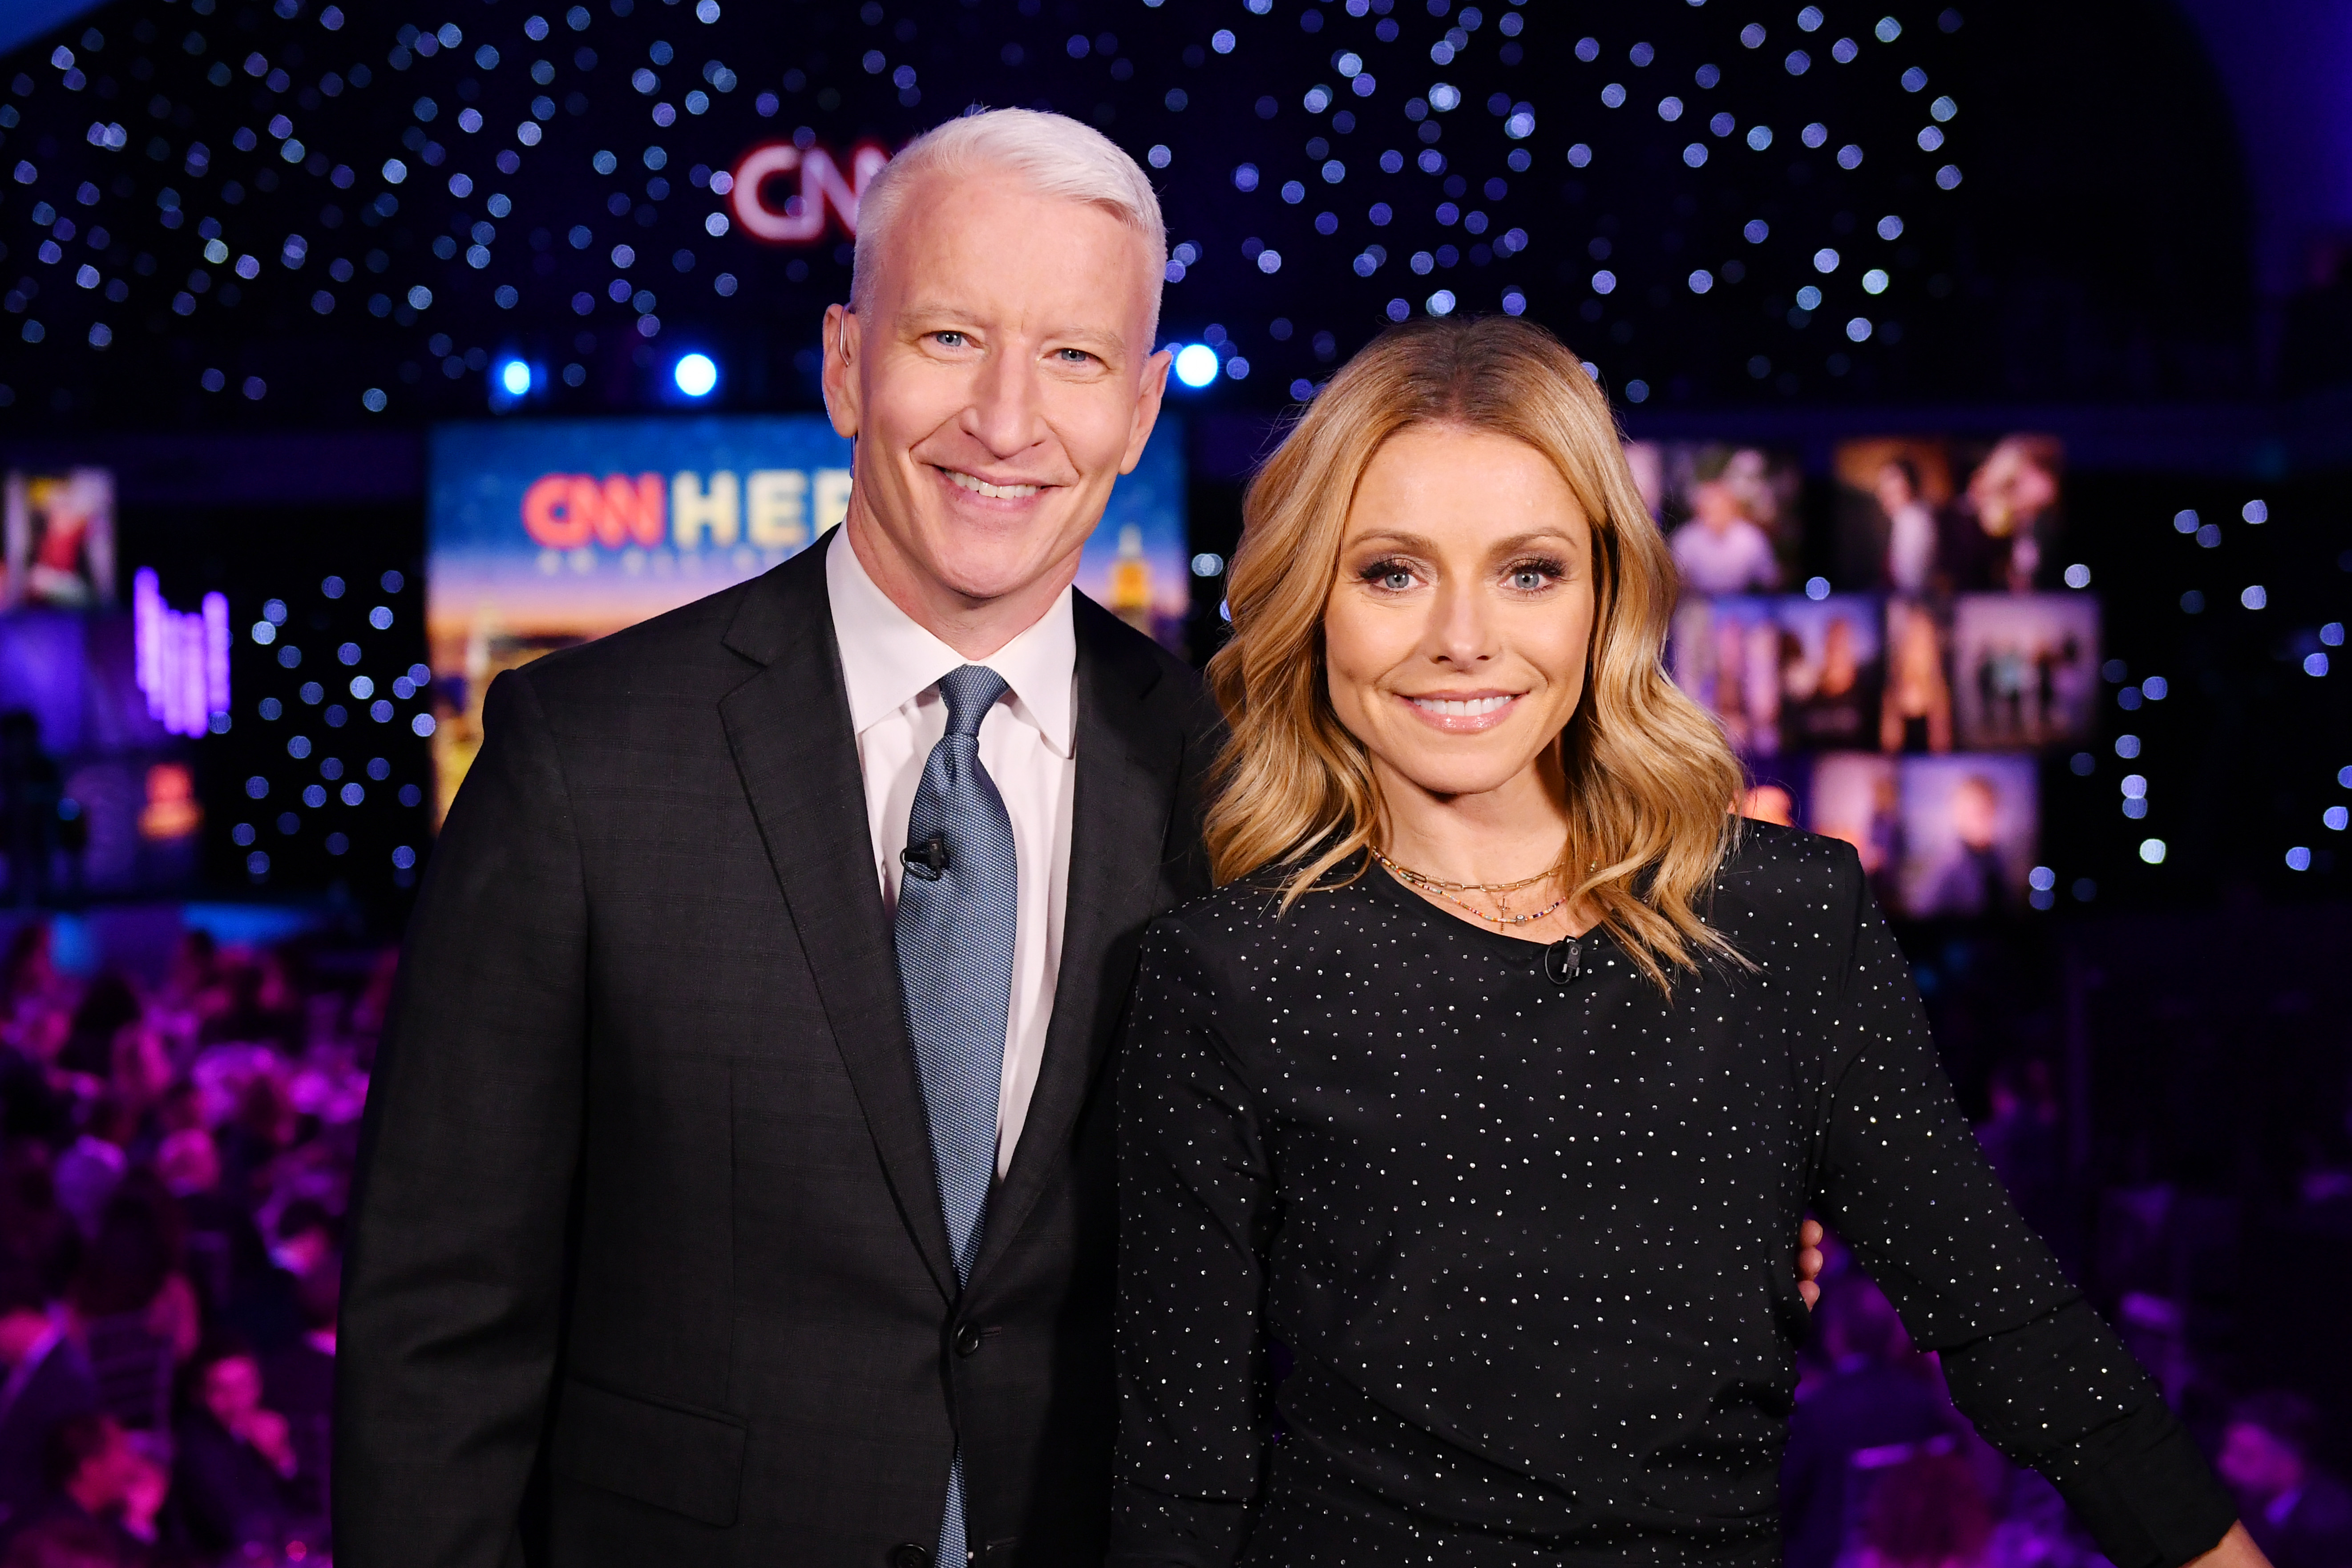 Kelly Ripa and Anderson Cooper on December 9, 2018 in New York City. | Source: Getty Images